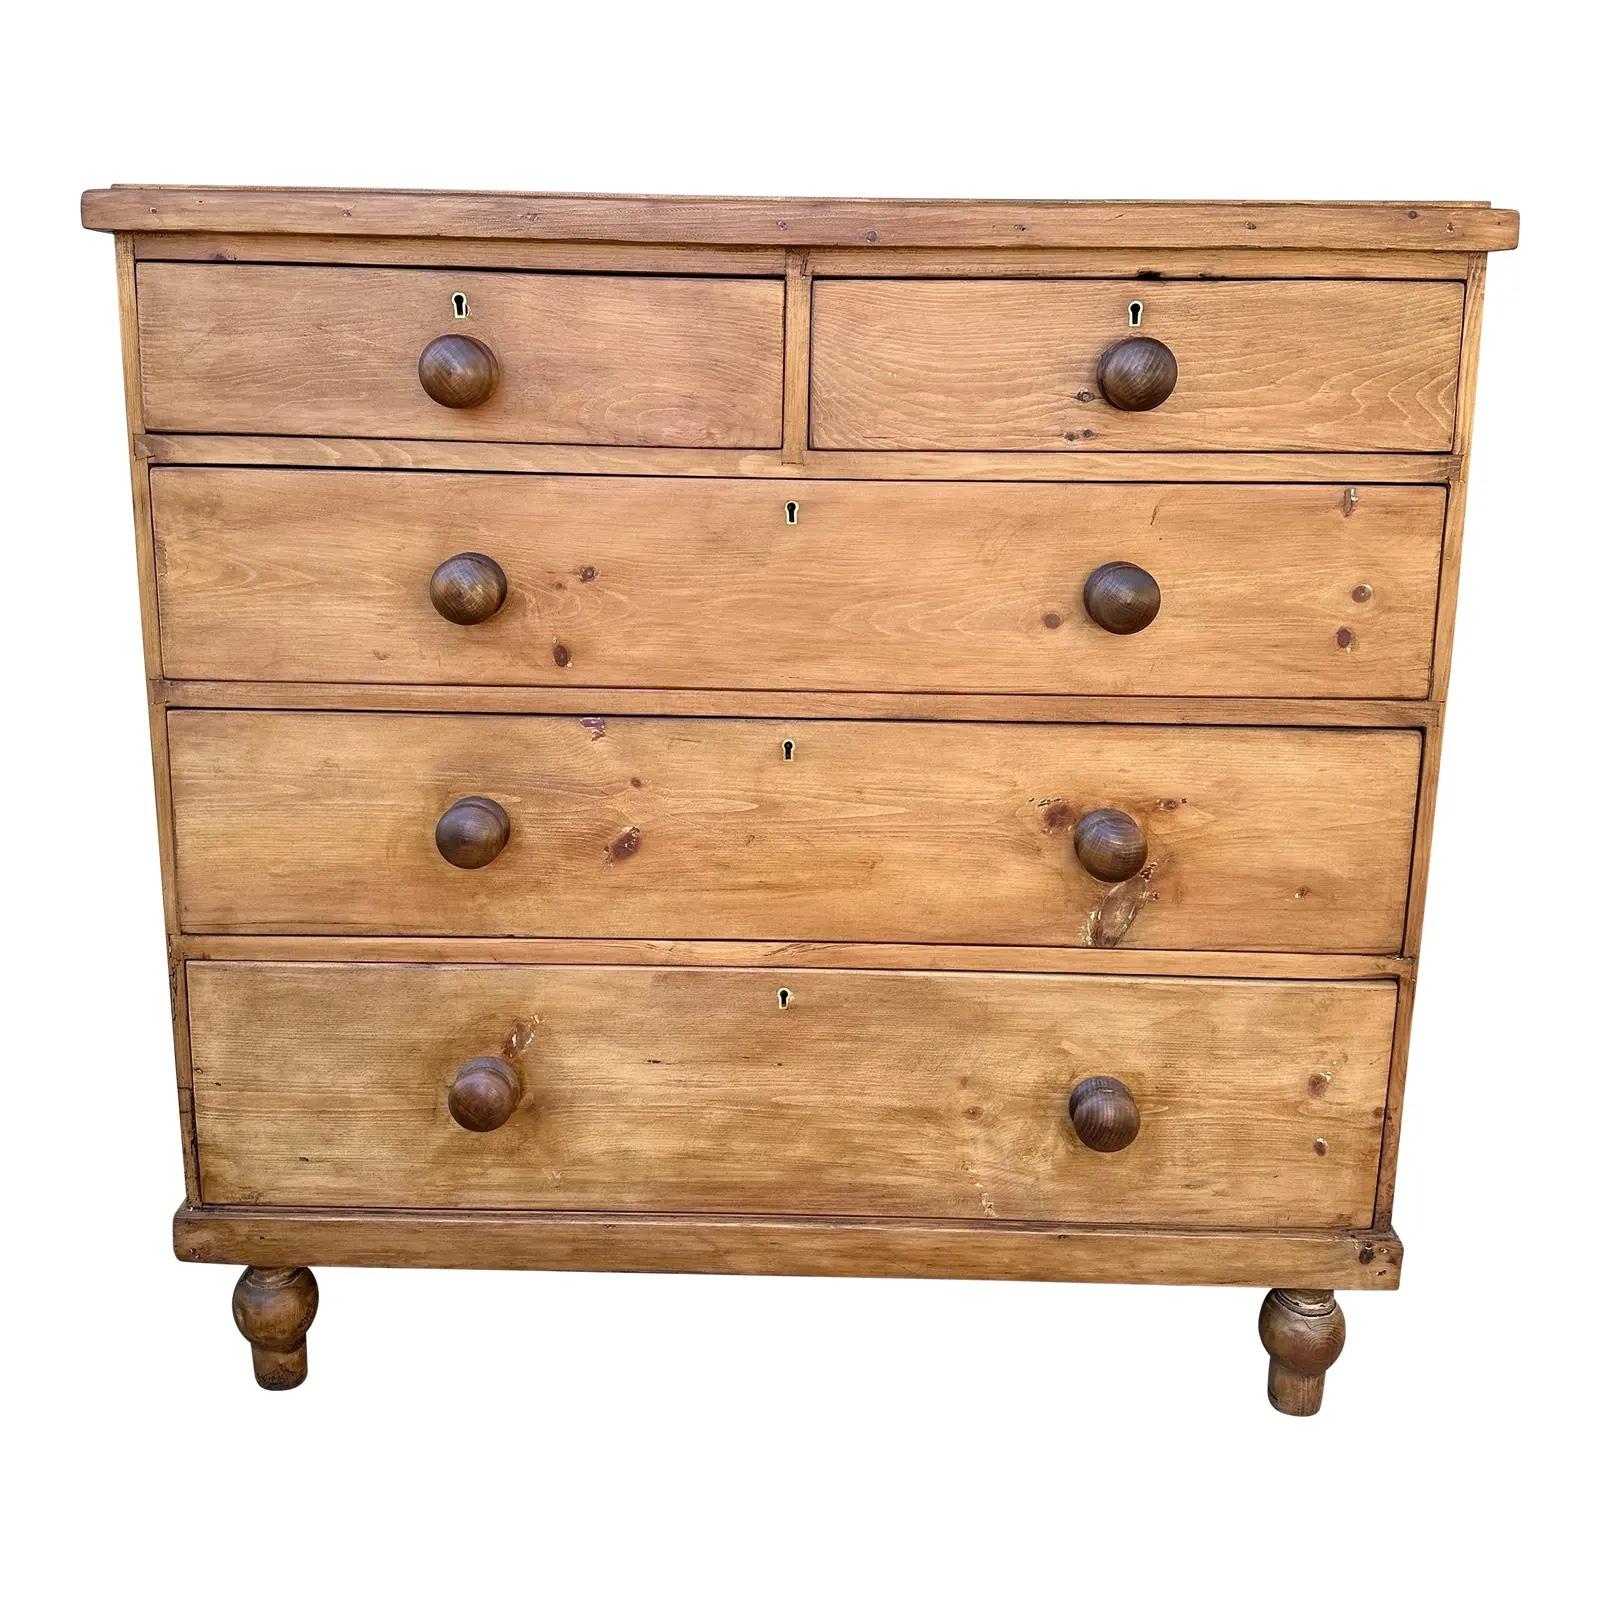 This is a lovely antique pine chest! This piece dates to the 19th century and has lovely patina. The wood has a warm glow, that is accented perfectly by the darker stained knobs. Being a two over three design with a casual simple feel. This chest